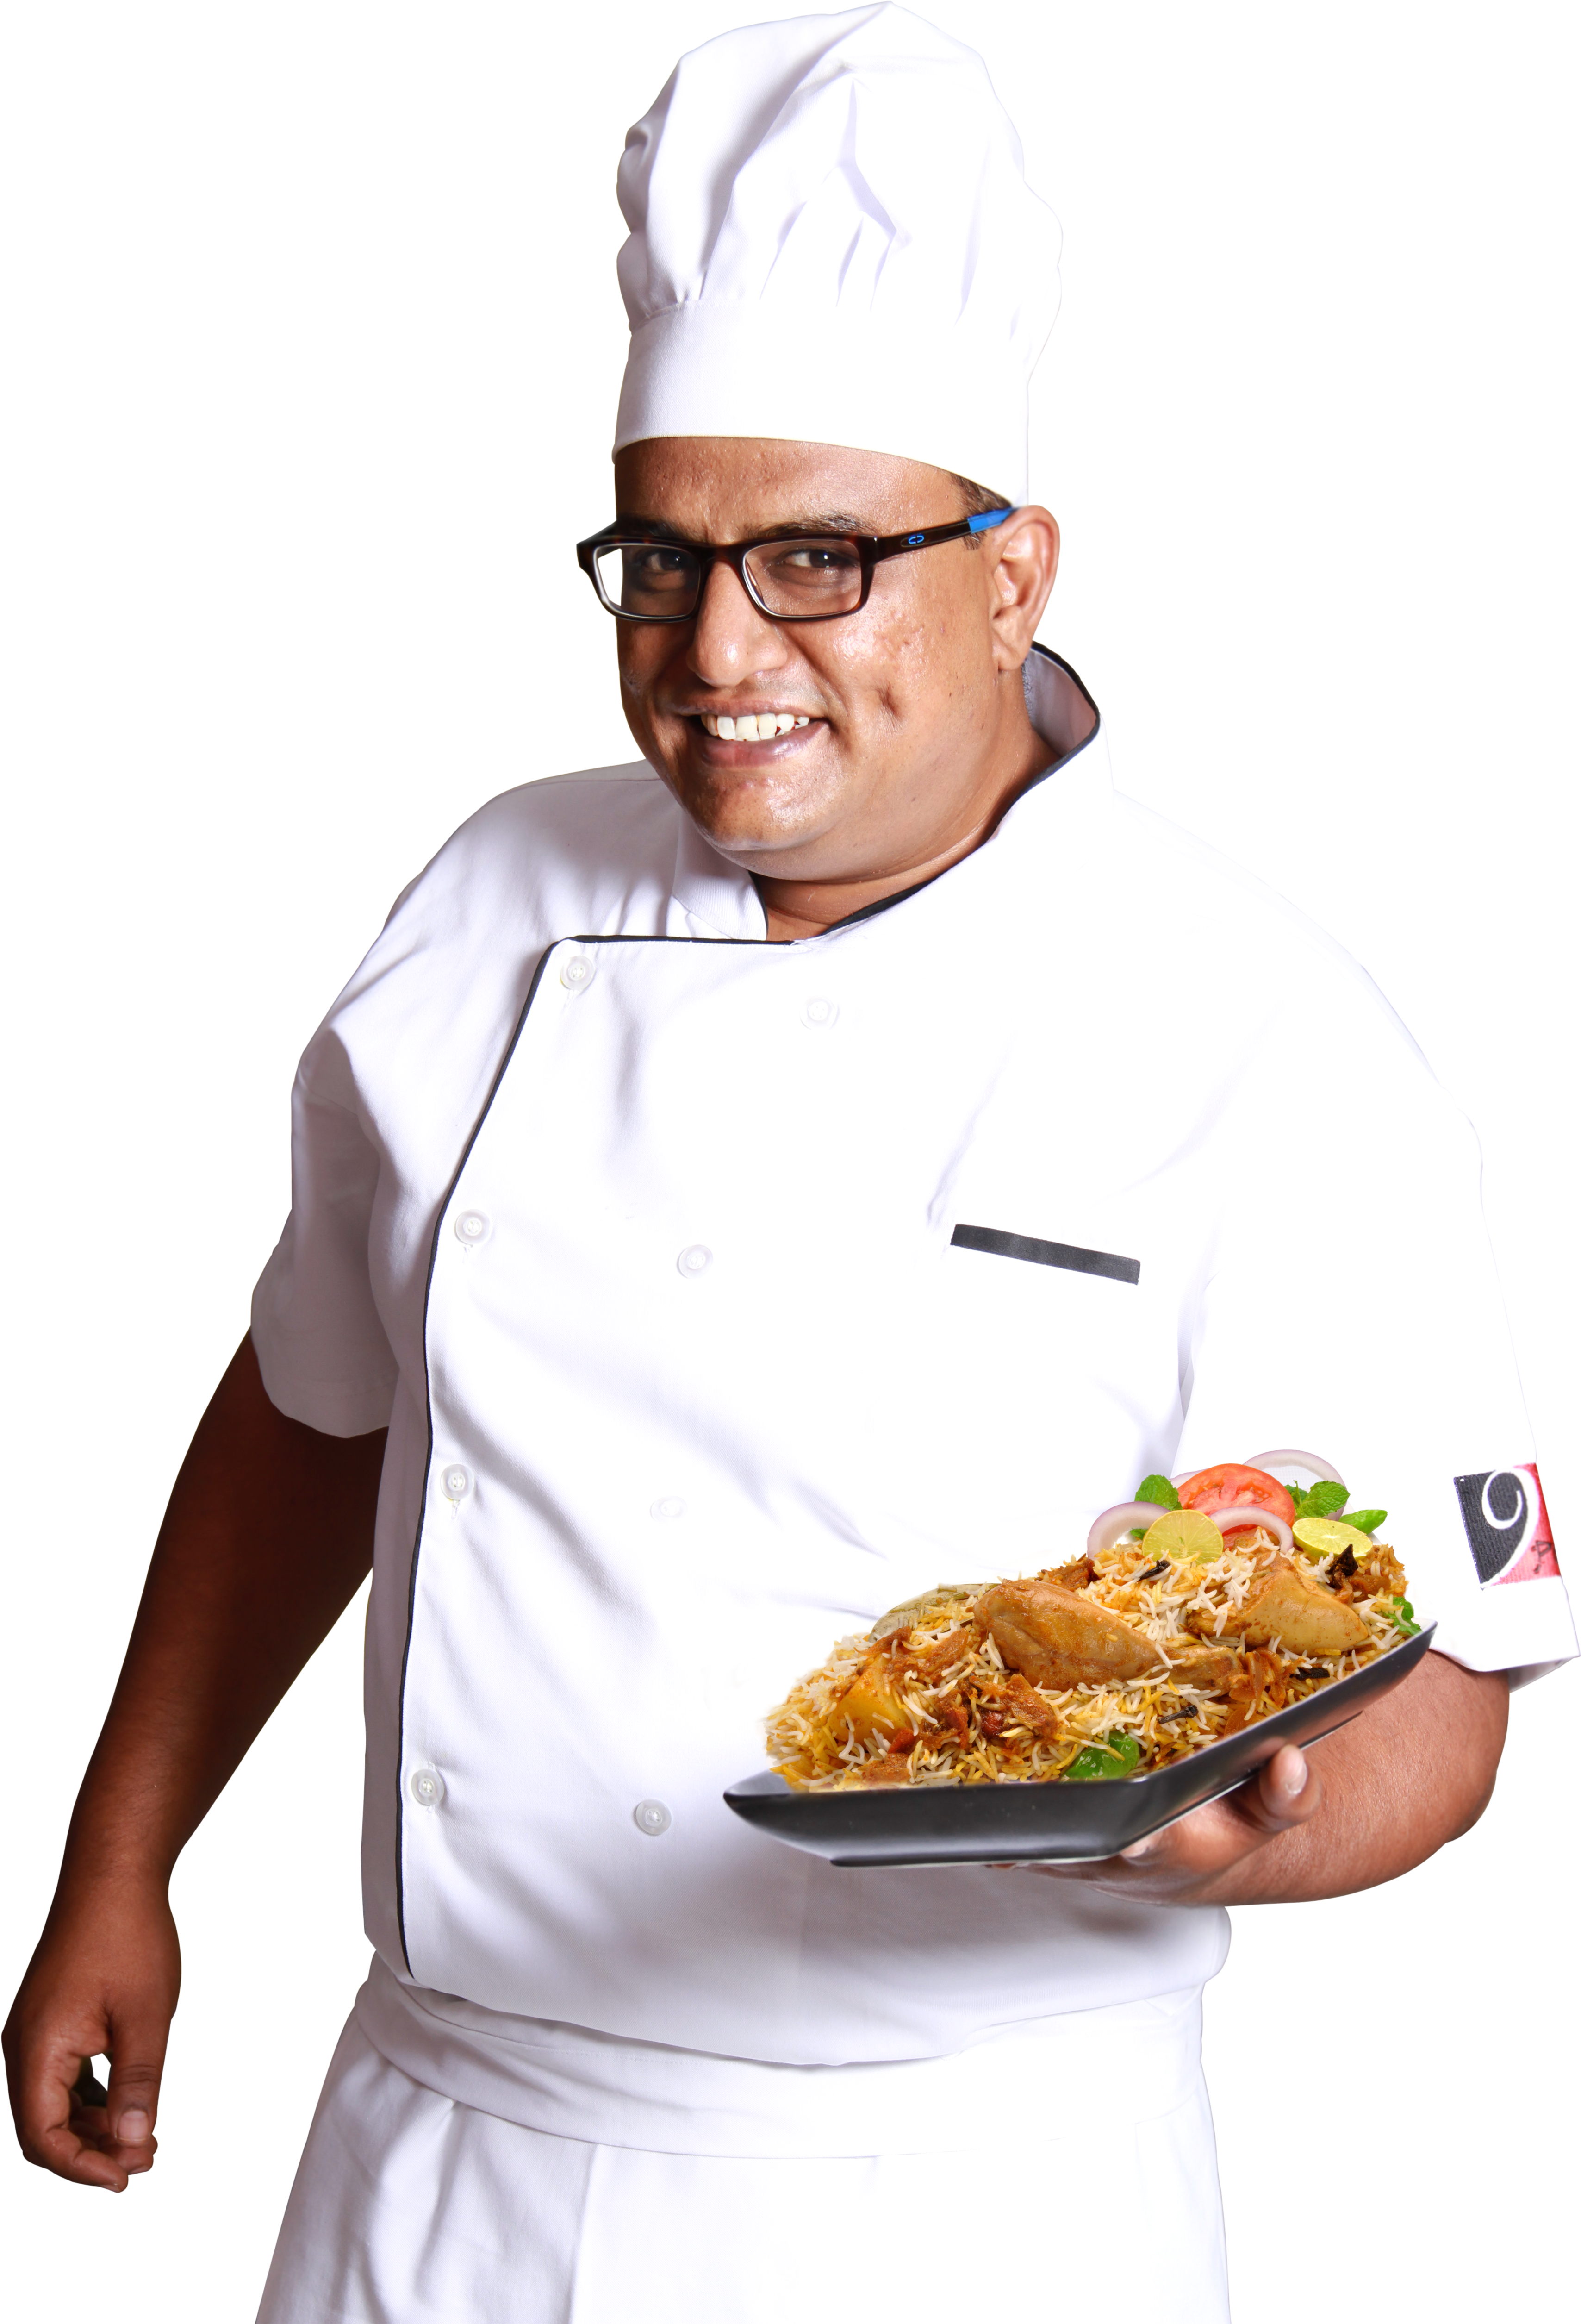 A Man In A Chef's Uniform Holding A Plate Of Food